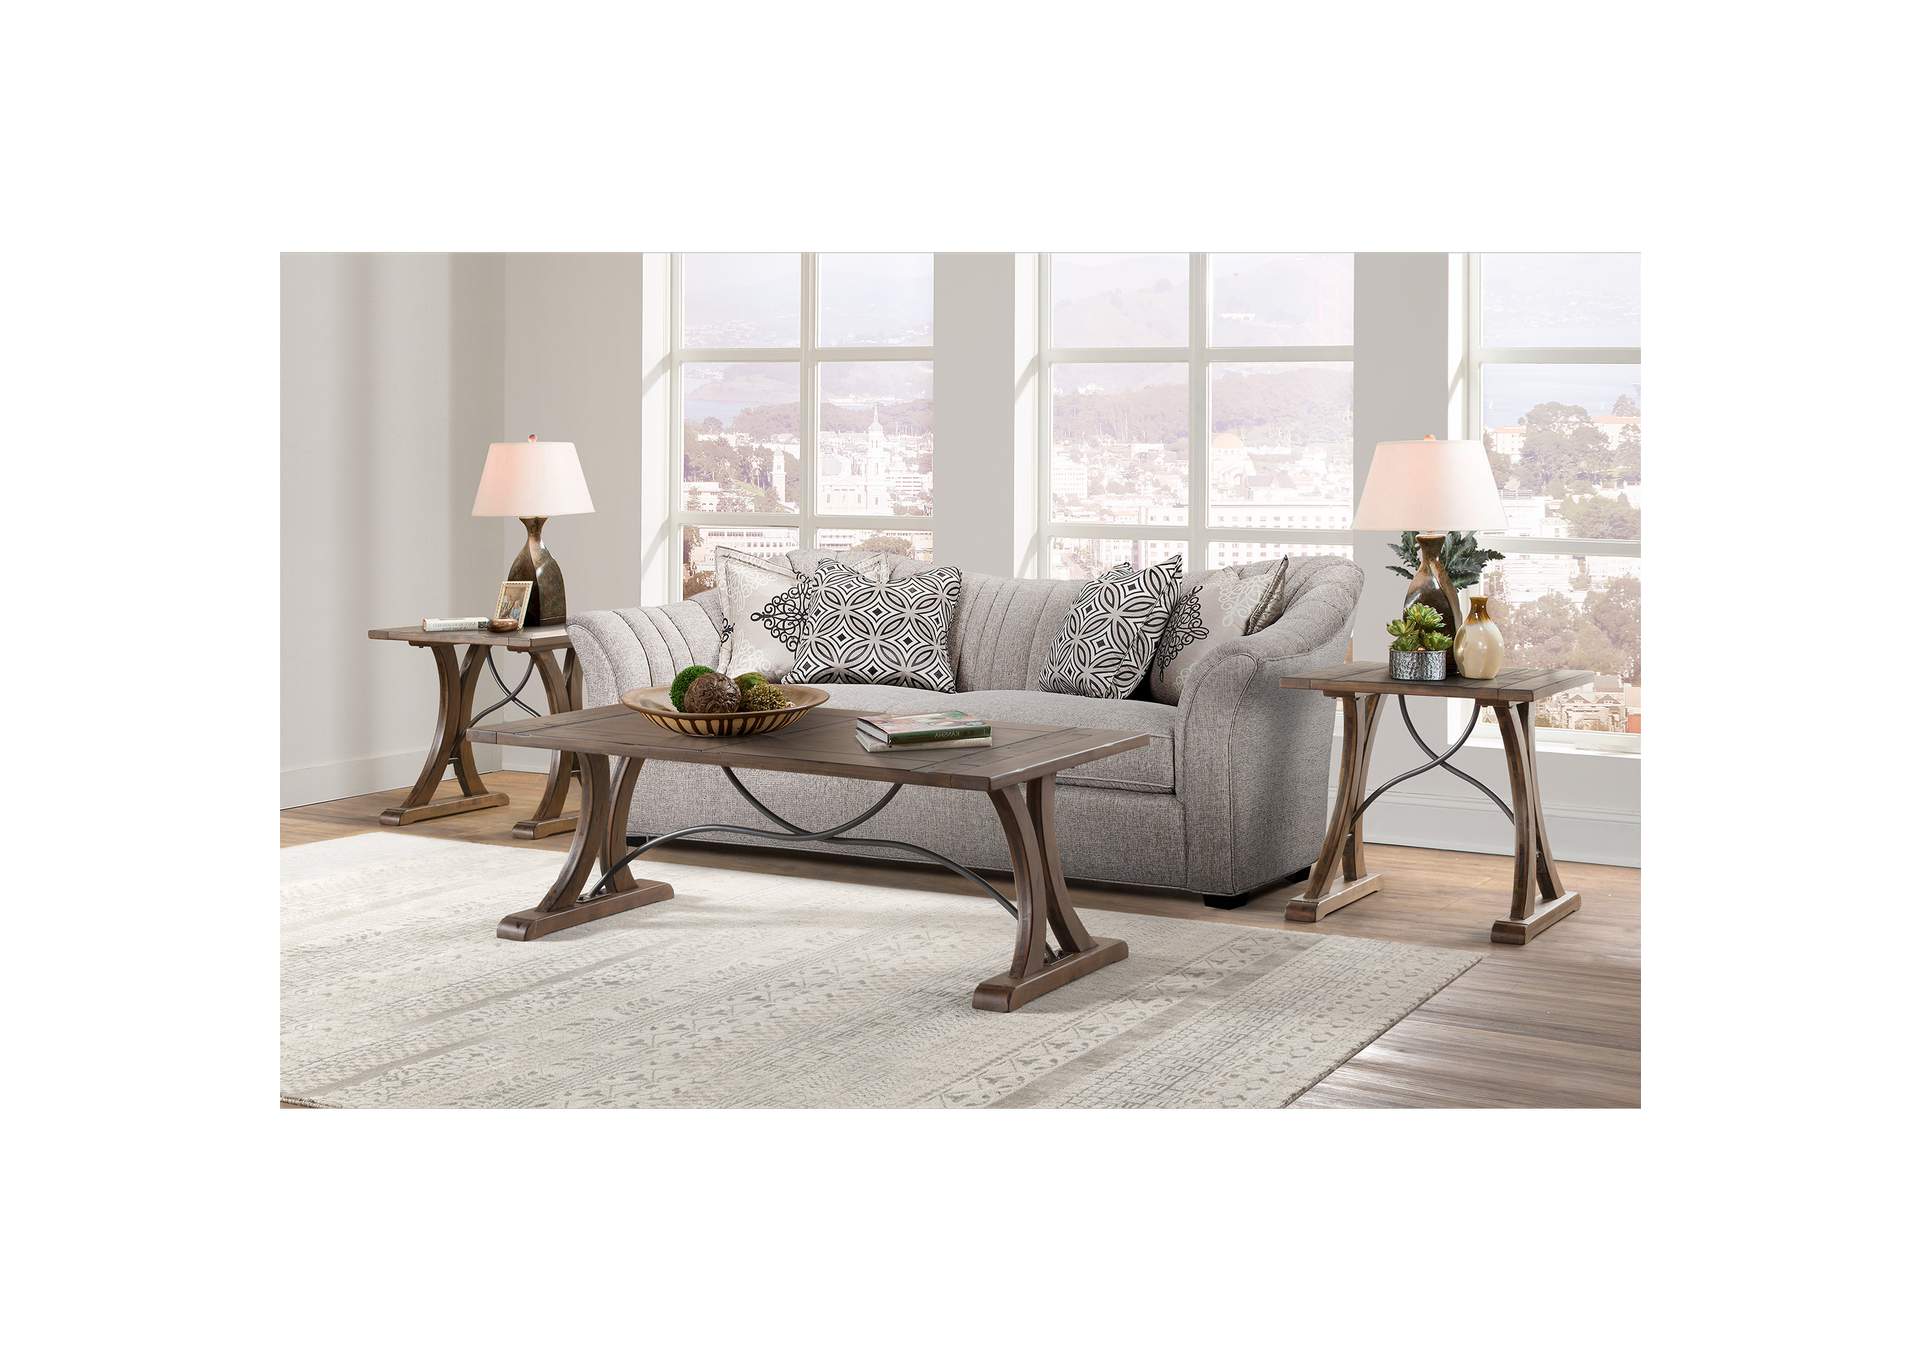 T682 - 125 New Bedford - Square End Table - Allegro Brown,Elements